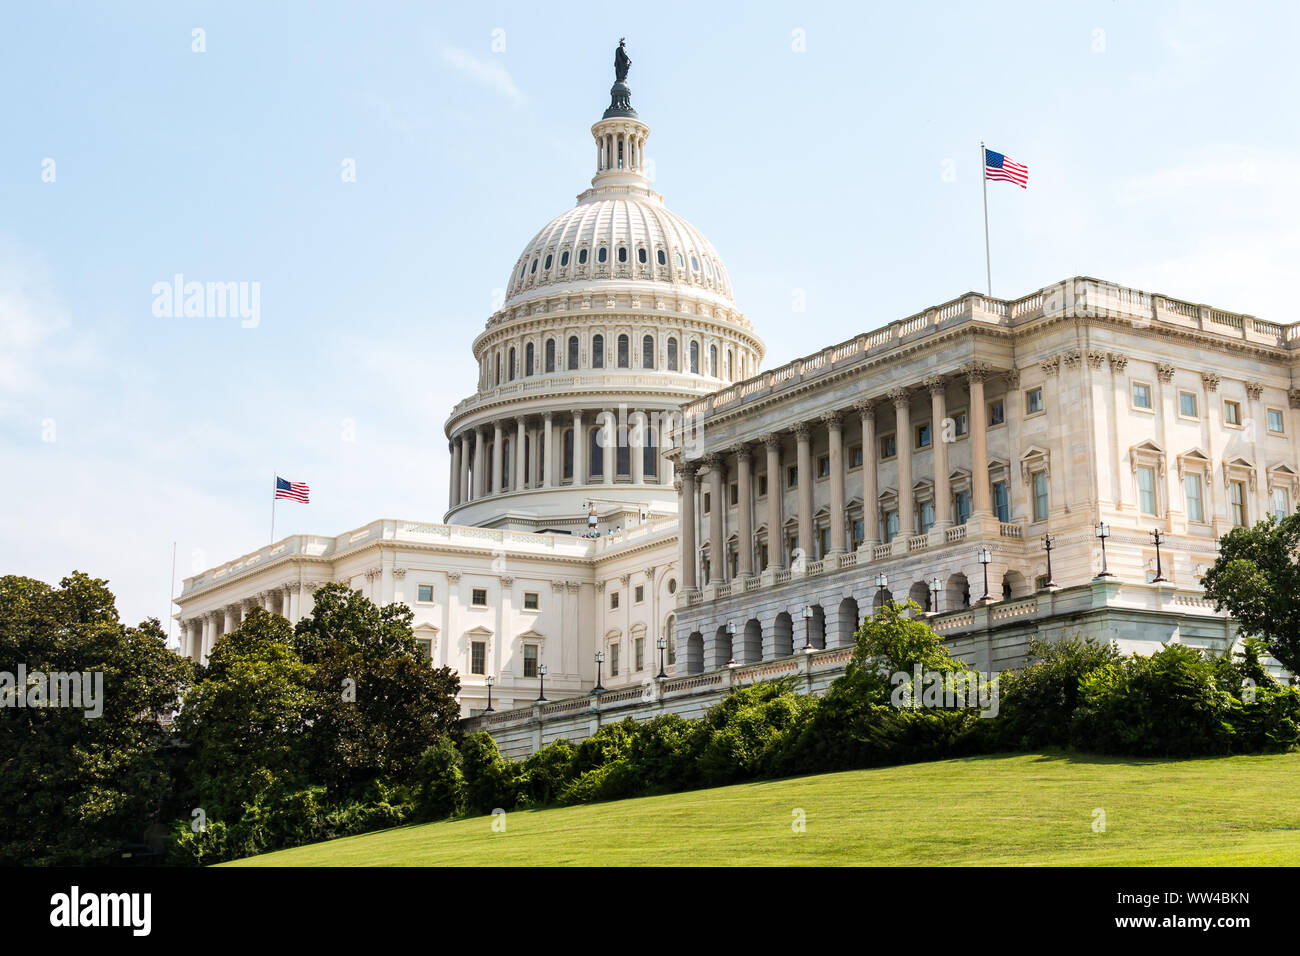 Side view of the U.S. Capitol Building, home of Congress, and located atop Capitol Hill at the eastern end of the National Mall in Washington, D.C. Stock Photo